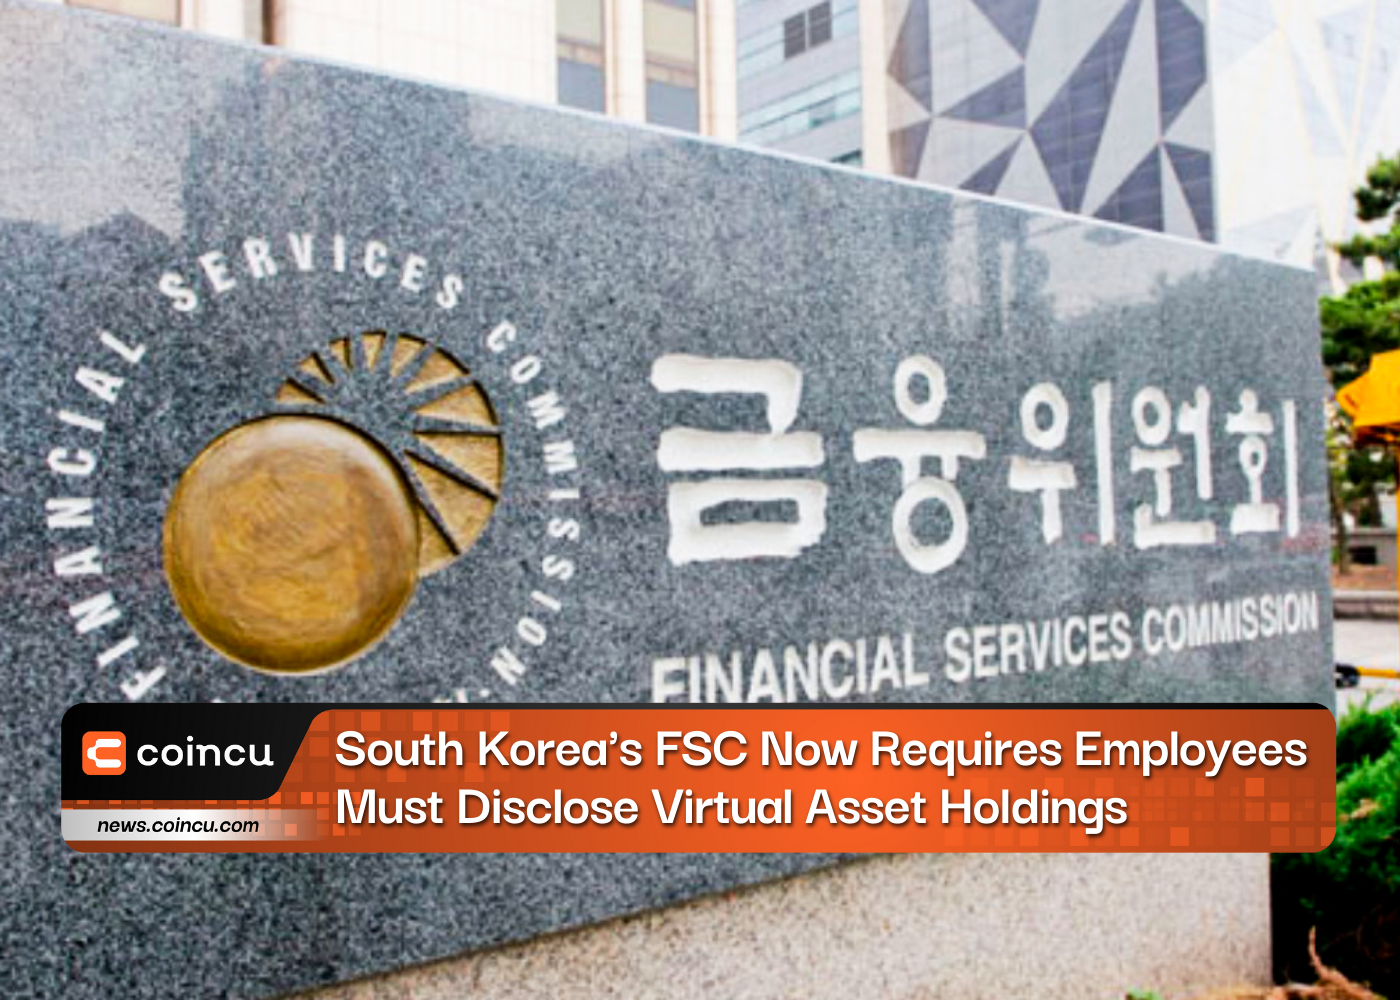 South Korea's FSC Now Requires Employees Must Disclose Virtual Asset Holdings